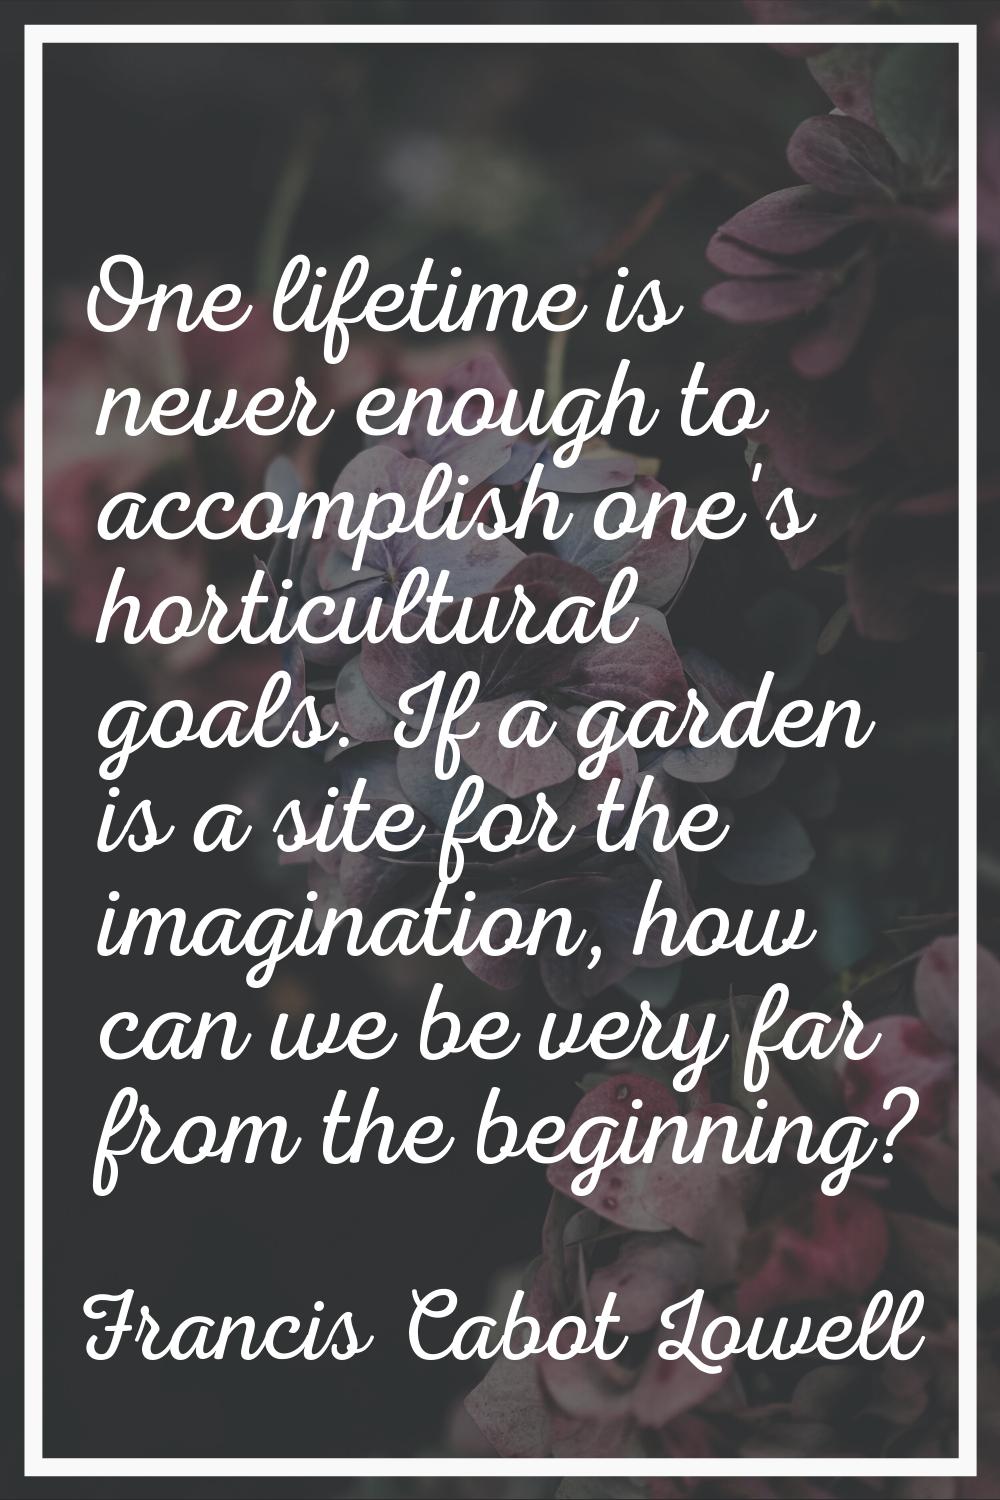 One lifetime is never enough to accomplish one's horticultural goals. If a garden is a site for the